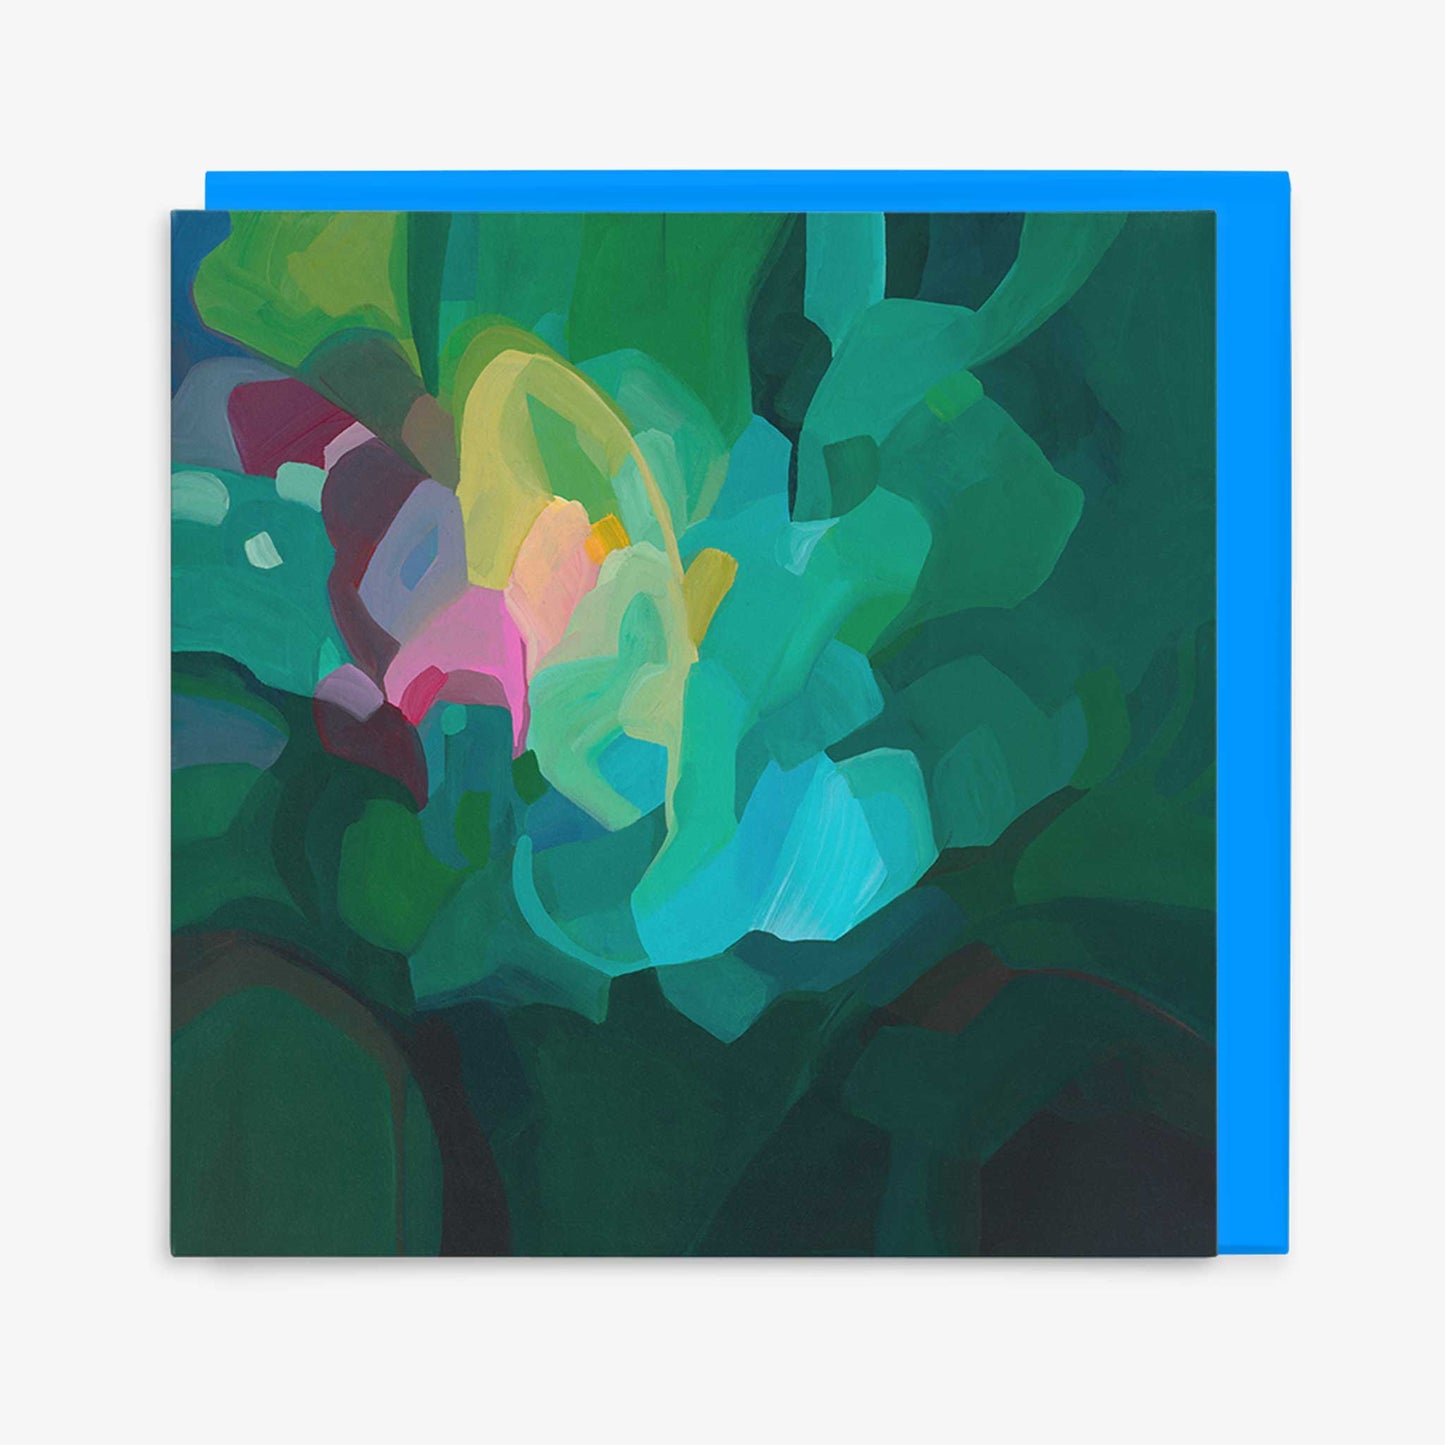 Emerald green abstract art greeting card with bright blue envelope